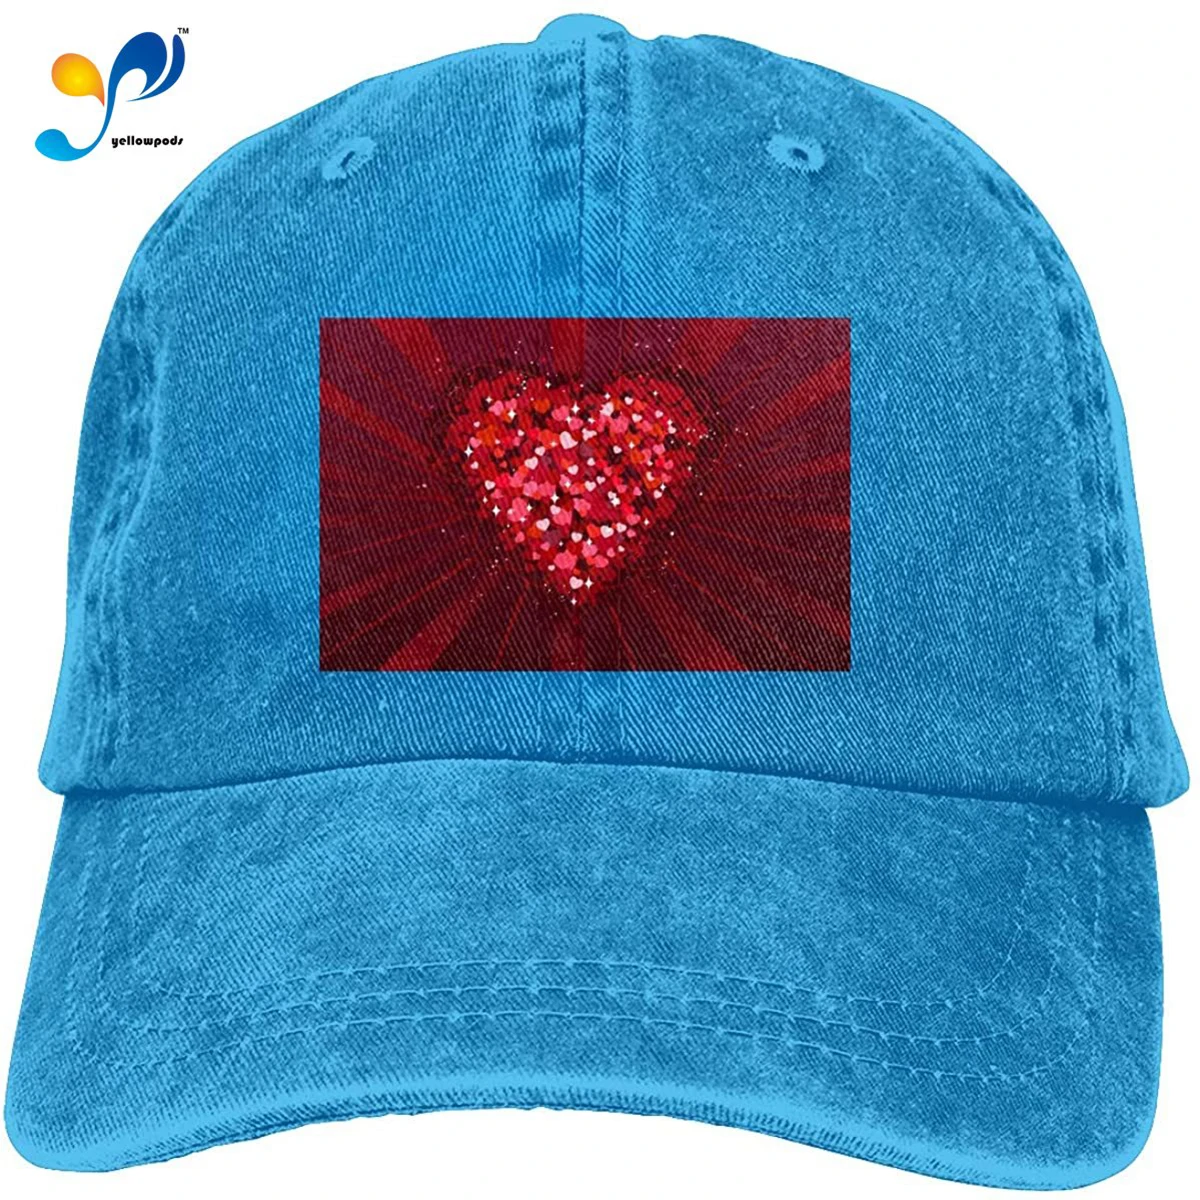 

NOT Valentine Heart Casquette，Sunshade Cotton Fashion Curved Along Caps for Men Women Sports Outdoo Hats